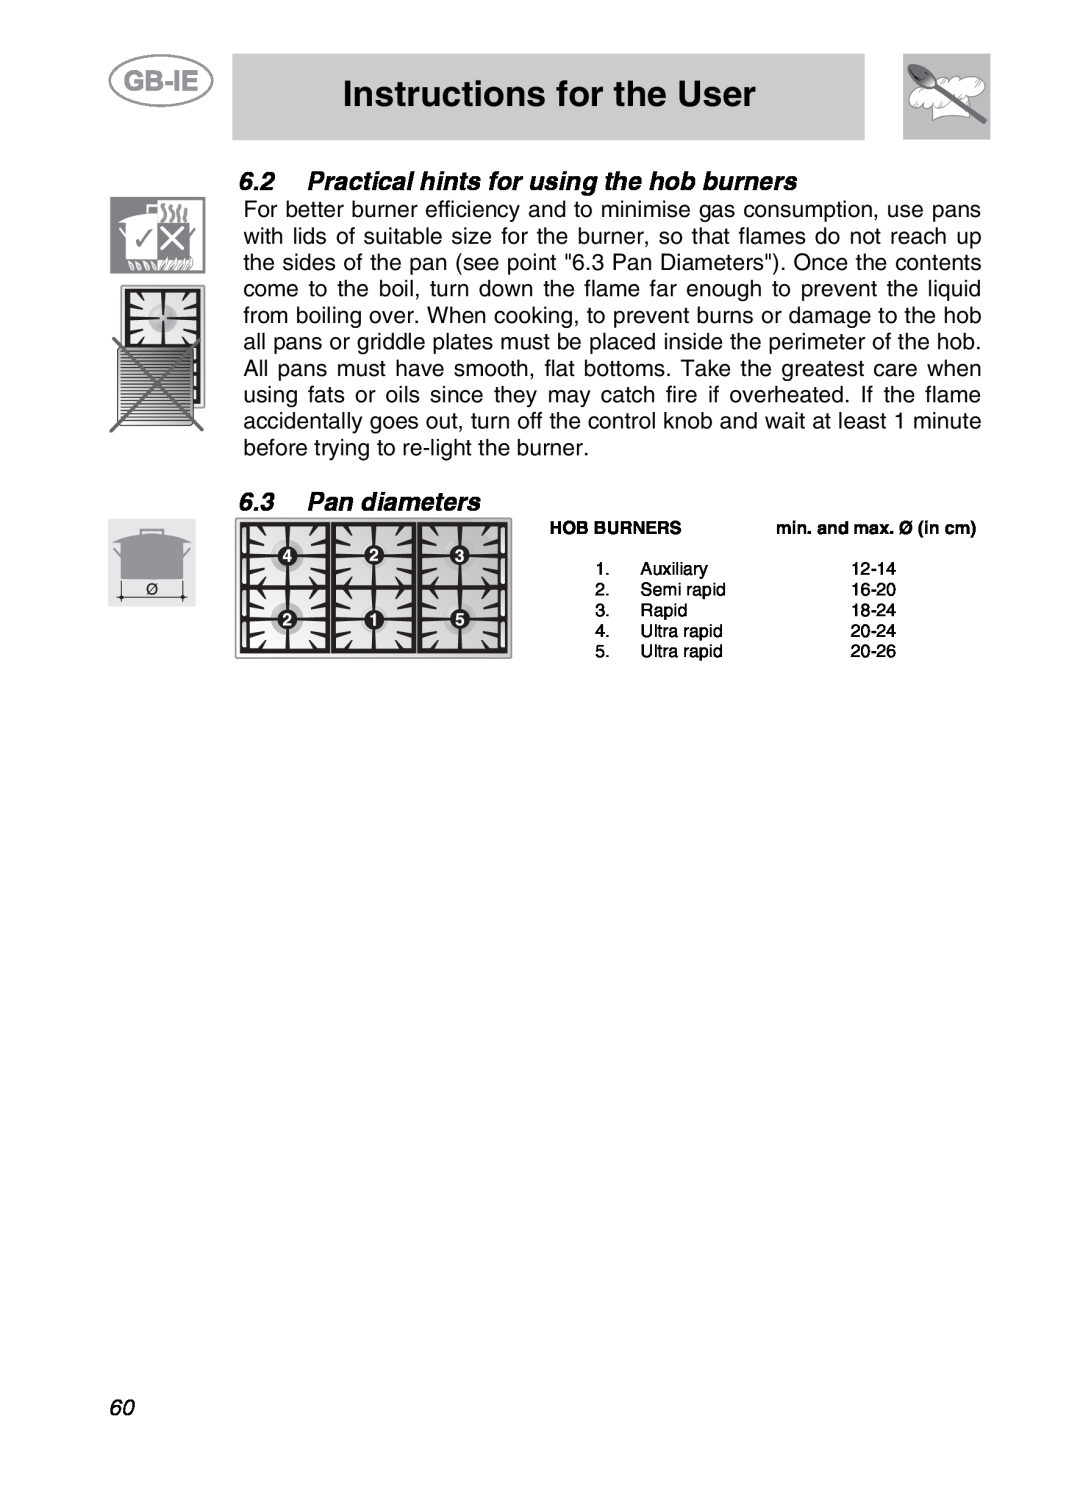 Smeg A2PY-6 manual Practical hints for using the hob burners, Pan diameters, Instructions for the User, Hob Burners 